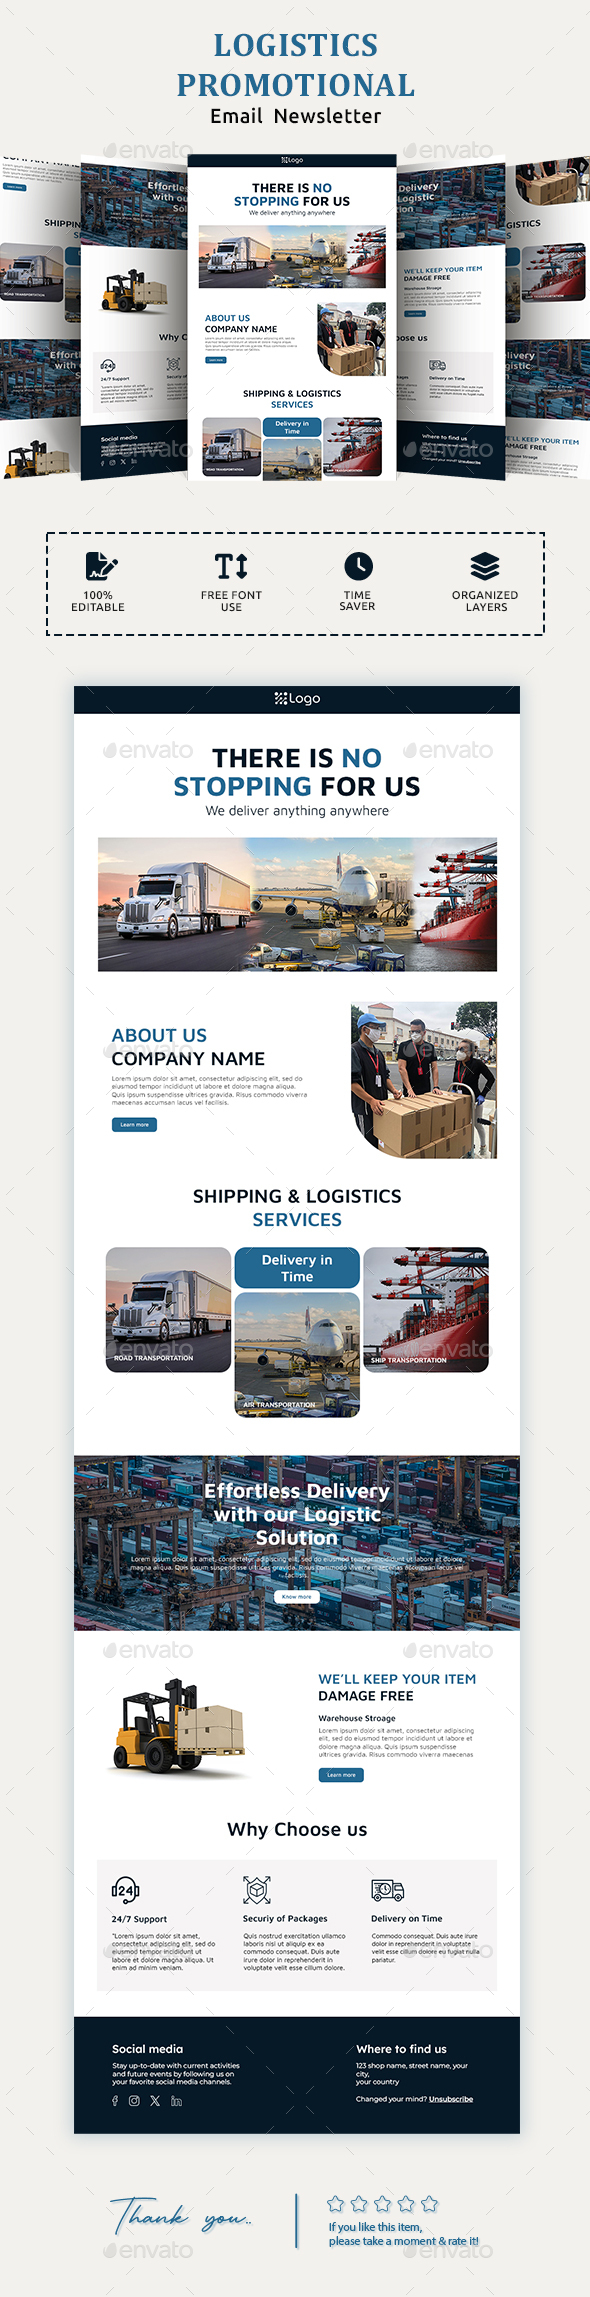 Shipping and Logistics Service Email Newsletter PSD Template